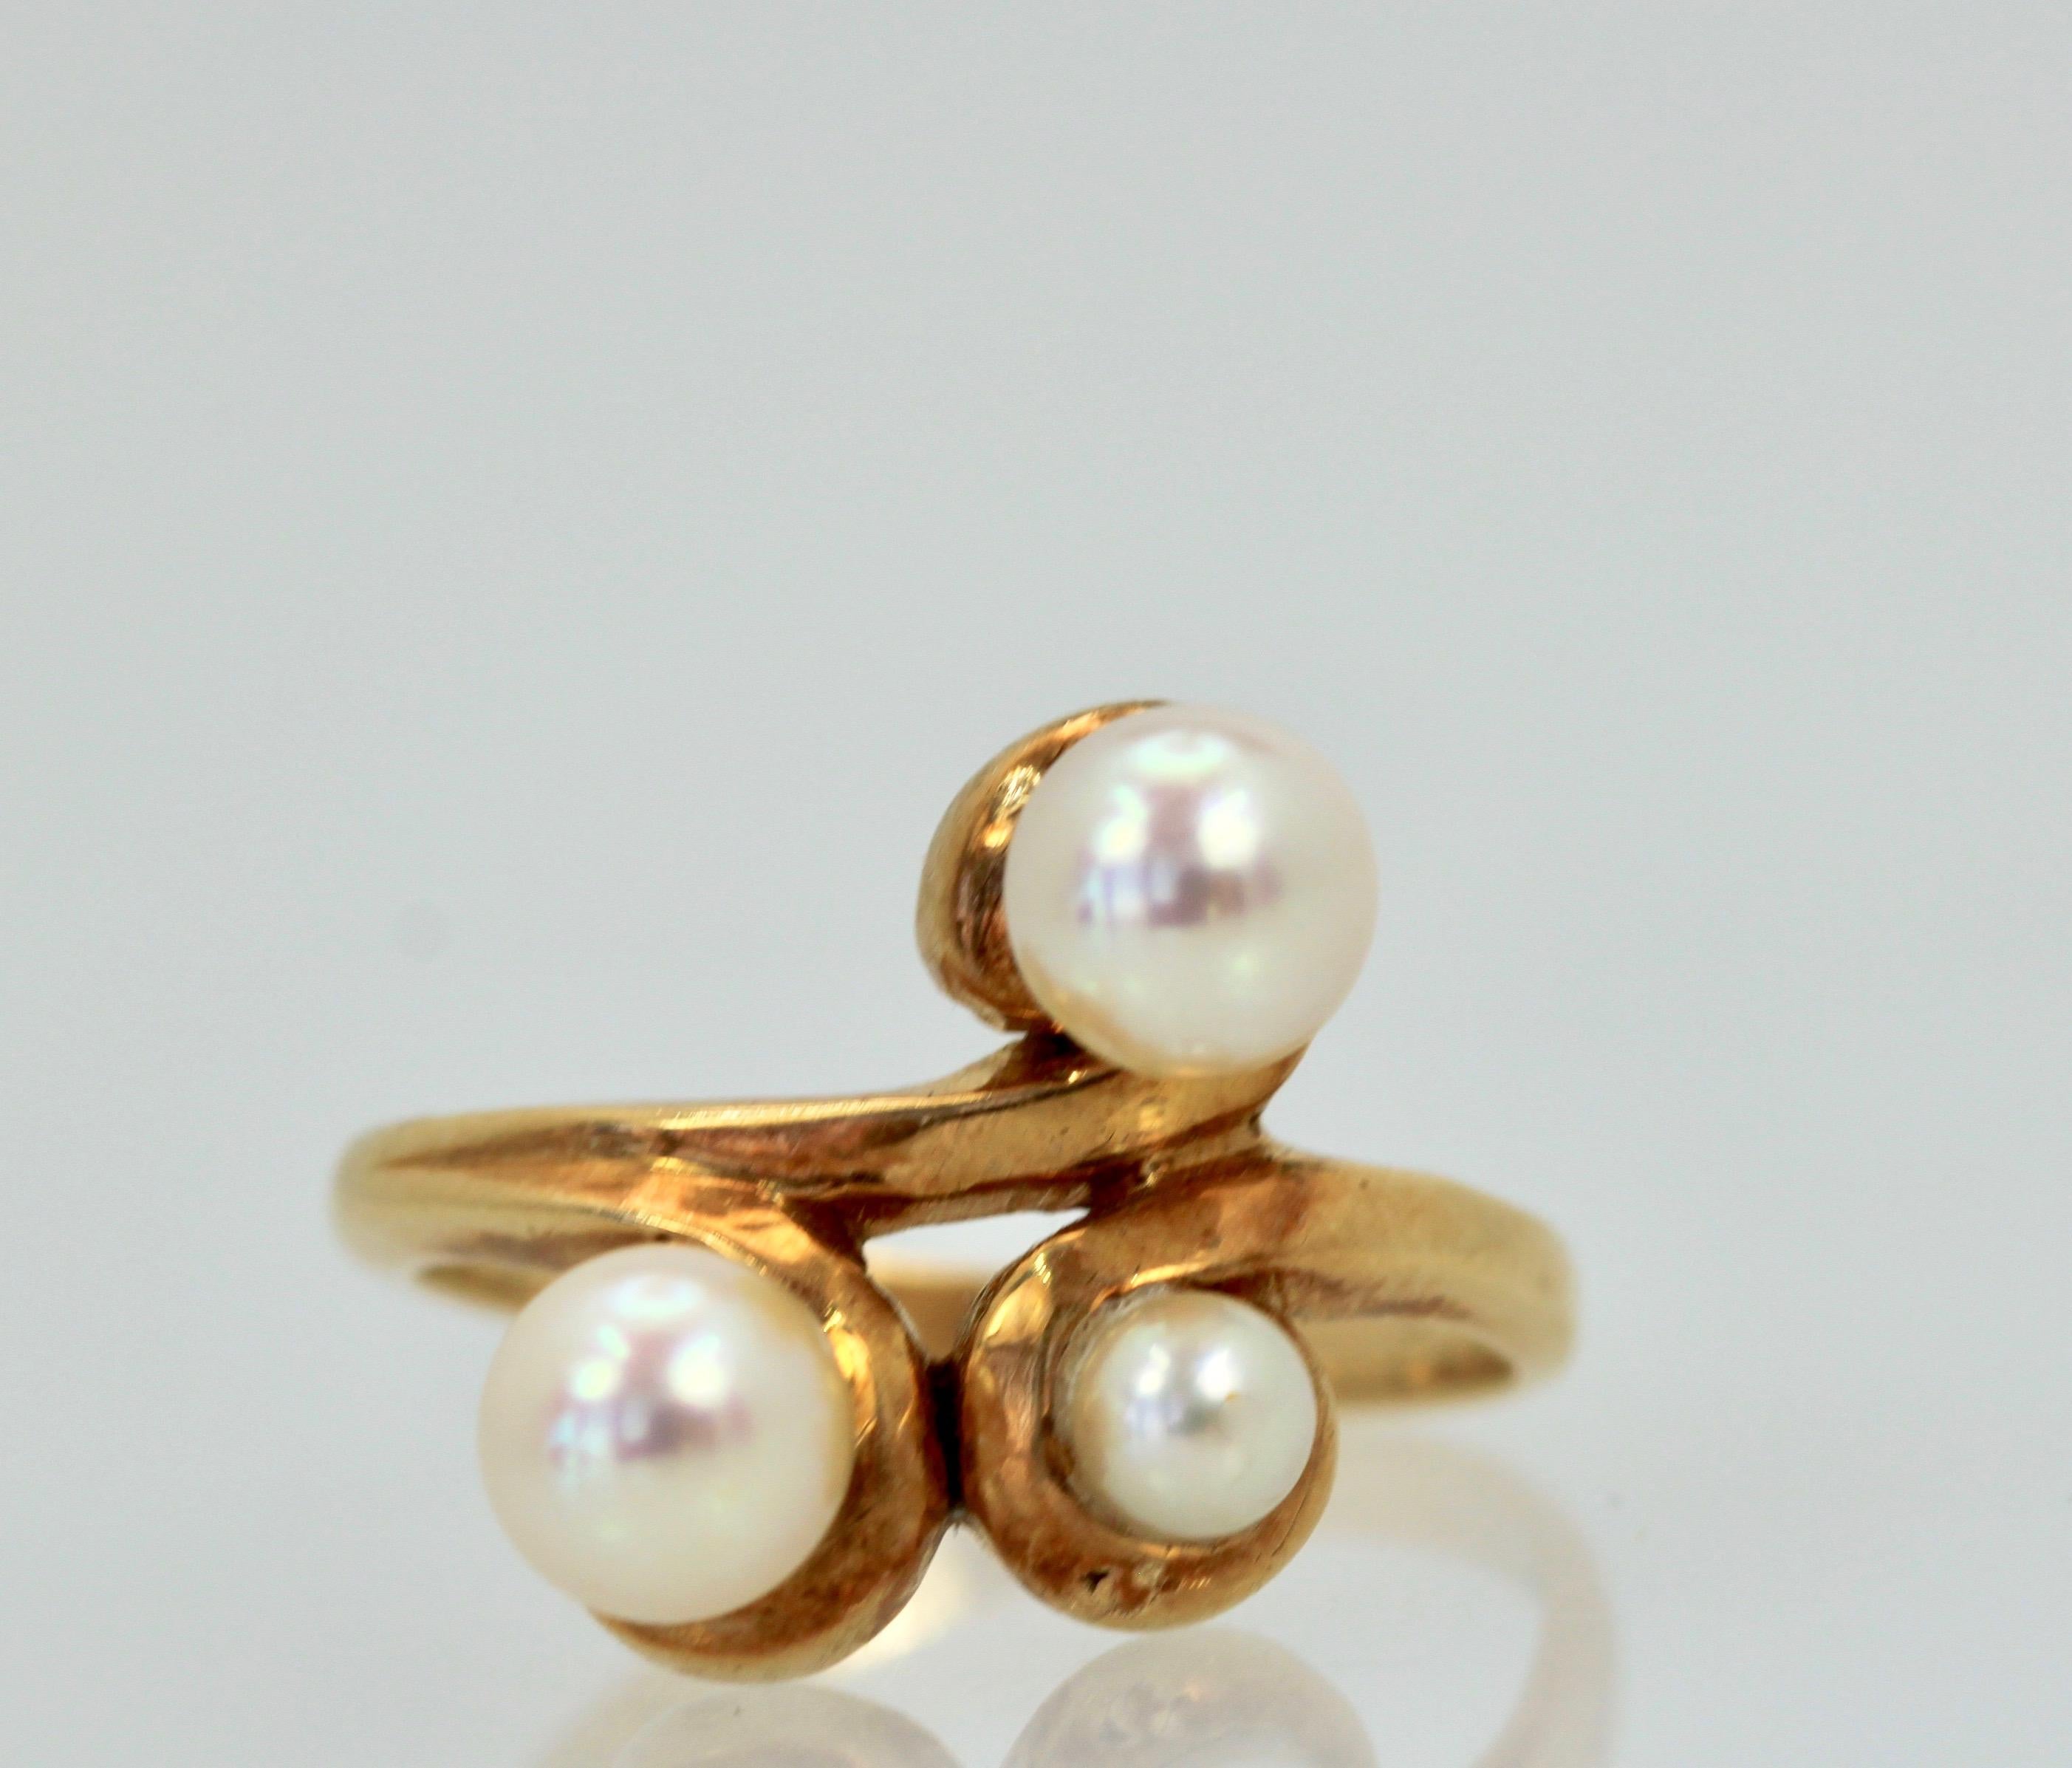 This vintage Saltwater Pearl Ring and Earring Suite is made from 14K Yellow Gold.  There are 3 Pearls on the Ring (2) are 4mm (1) is 2mm on a lovely gold mount.  The earrings hold 3 Pearls each of 4mm each in a clip pierced setting.  This set was